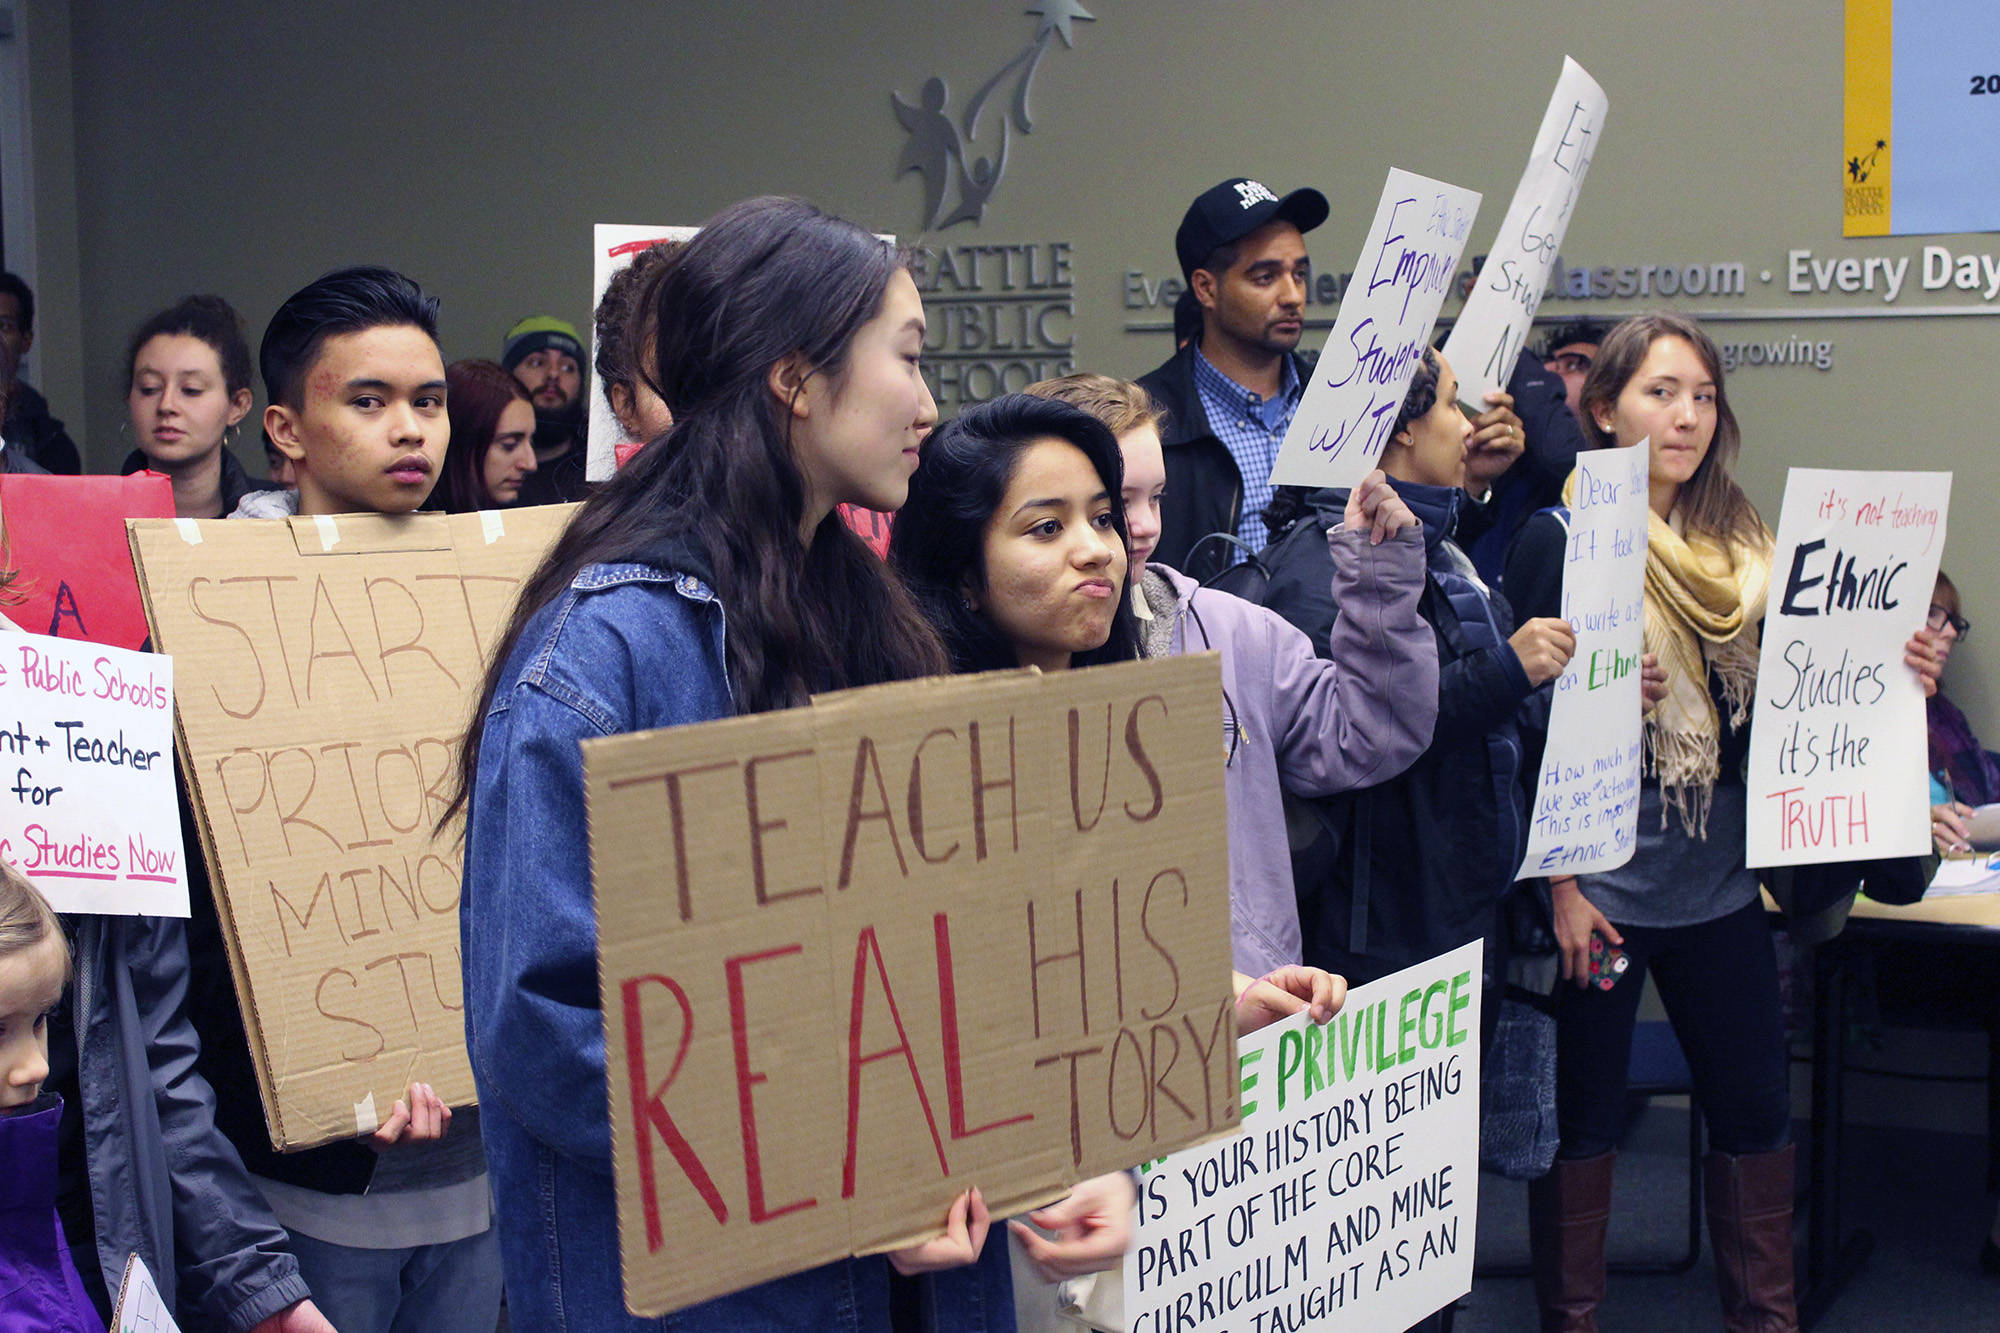 Students and teachers advocate for ethnic studies at a school board meeting in March. Photo by Sara Bernard